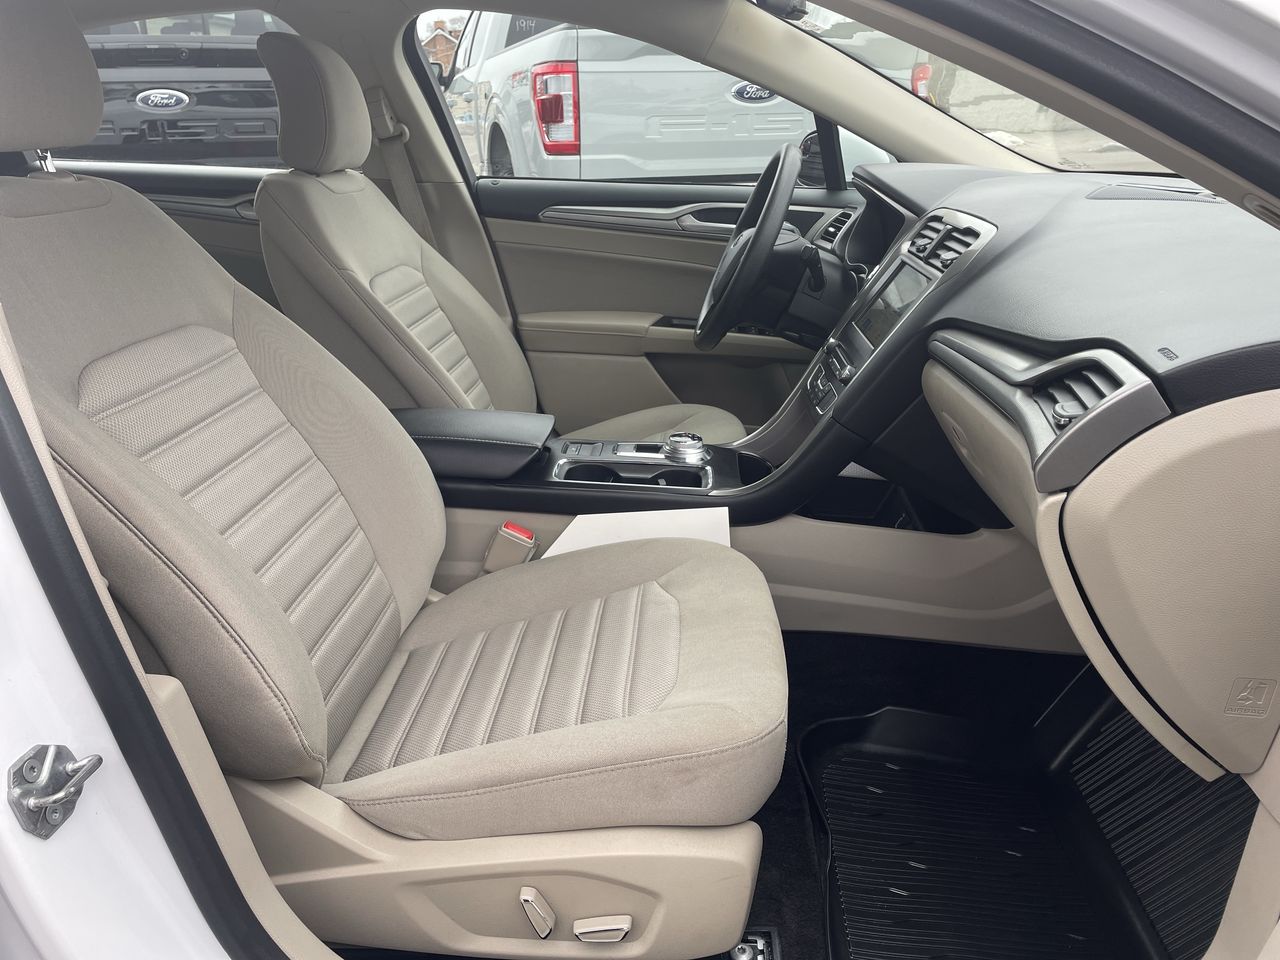 2018 Ford Fusion - P21087 Full Image 24